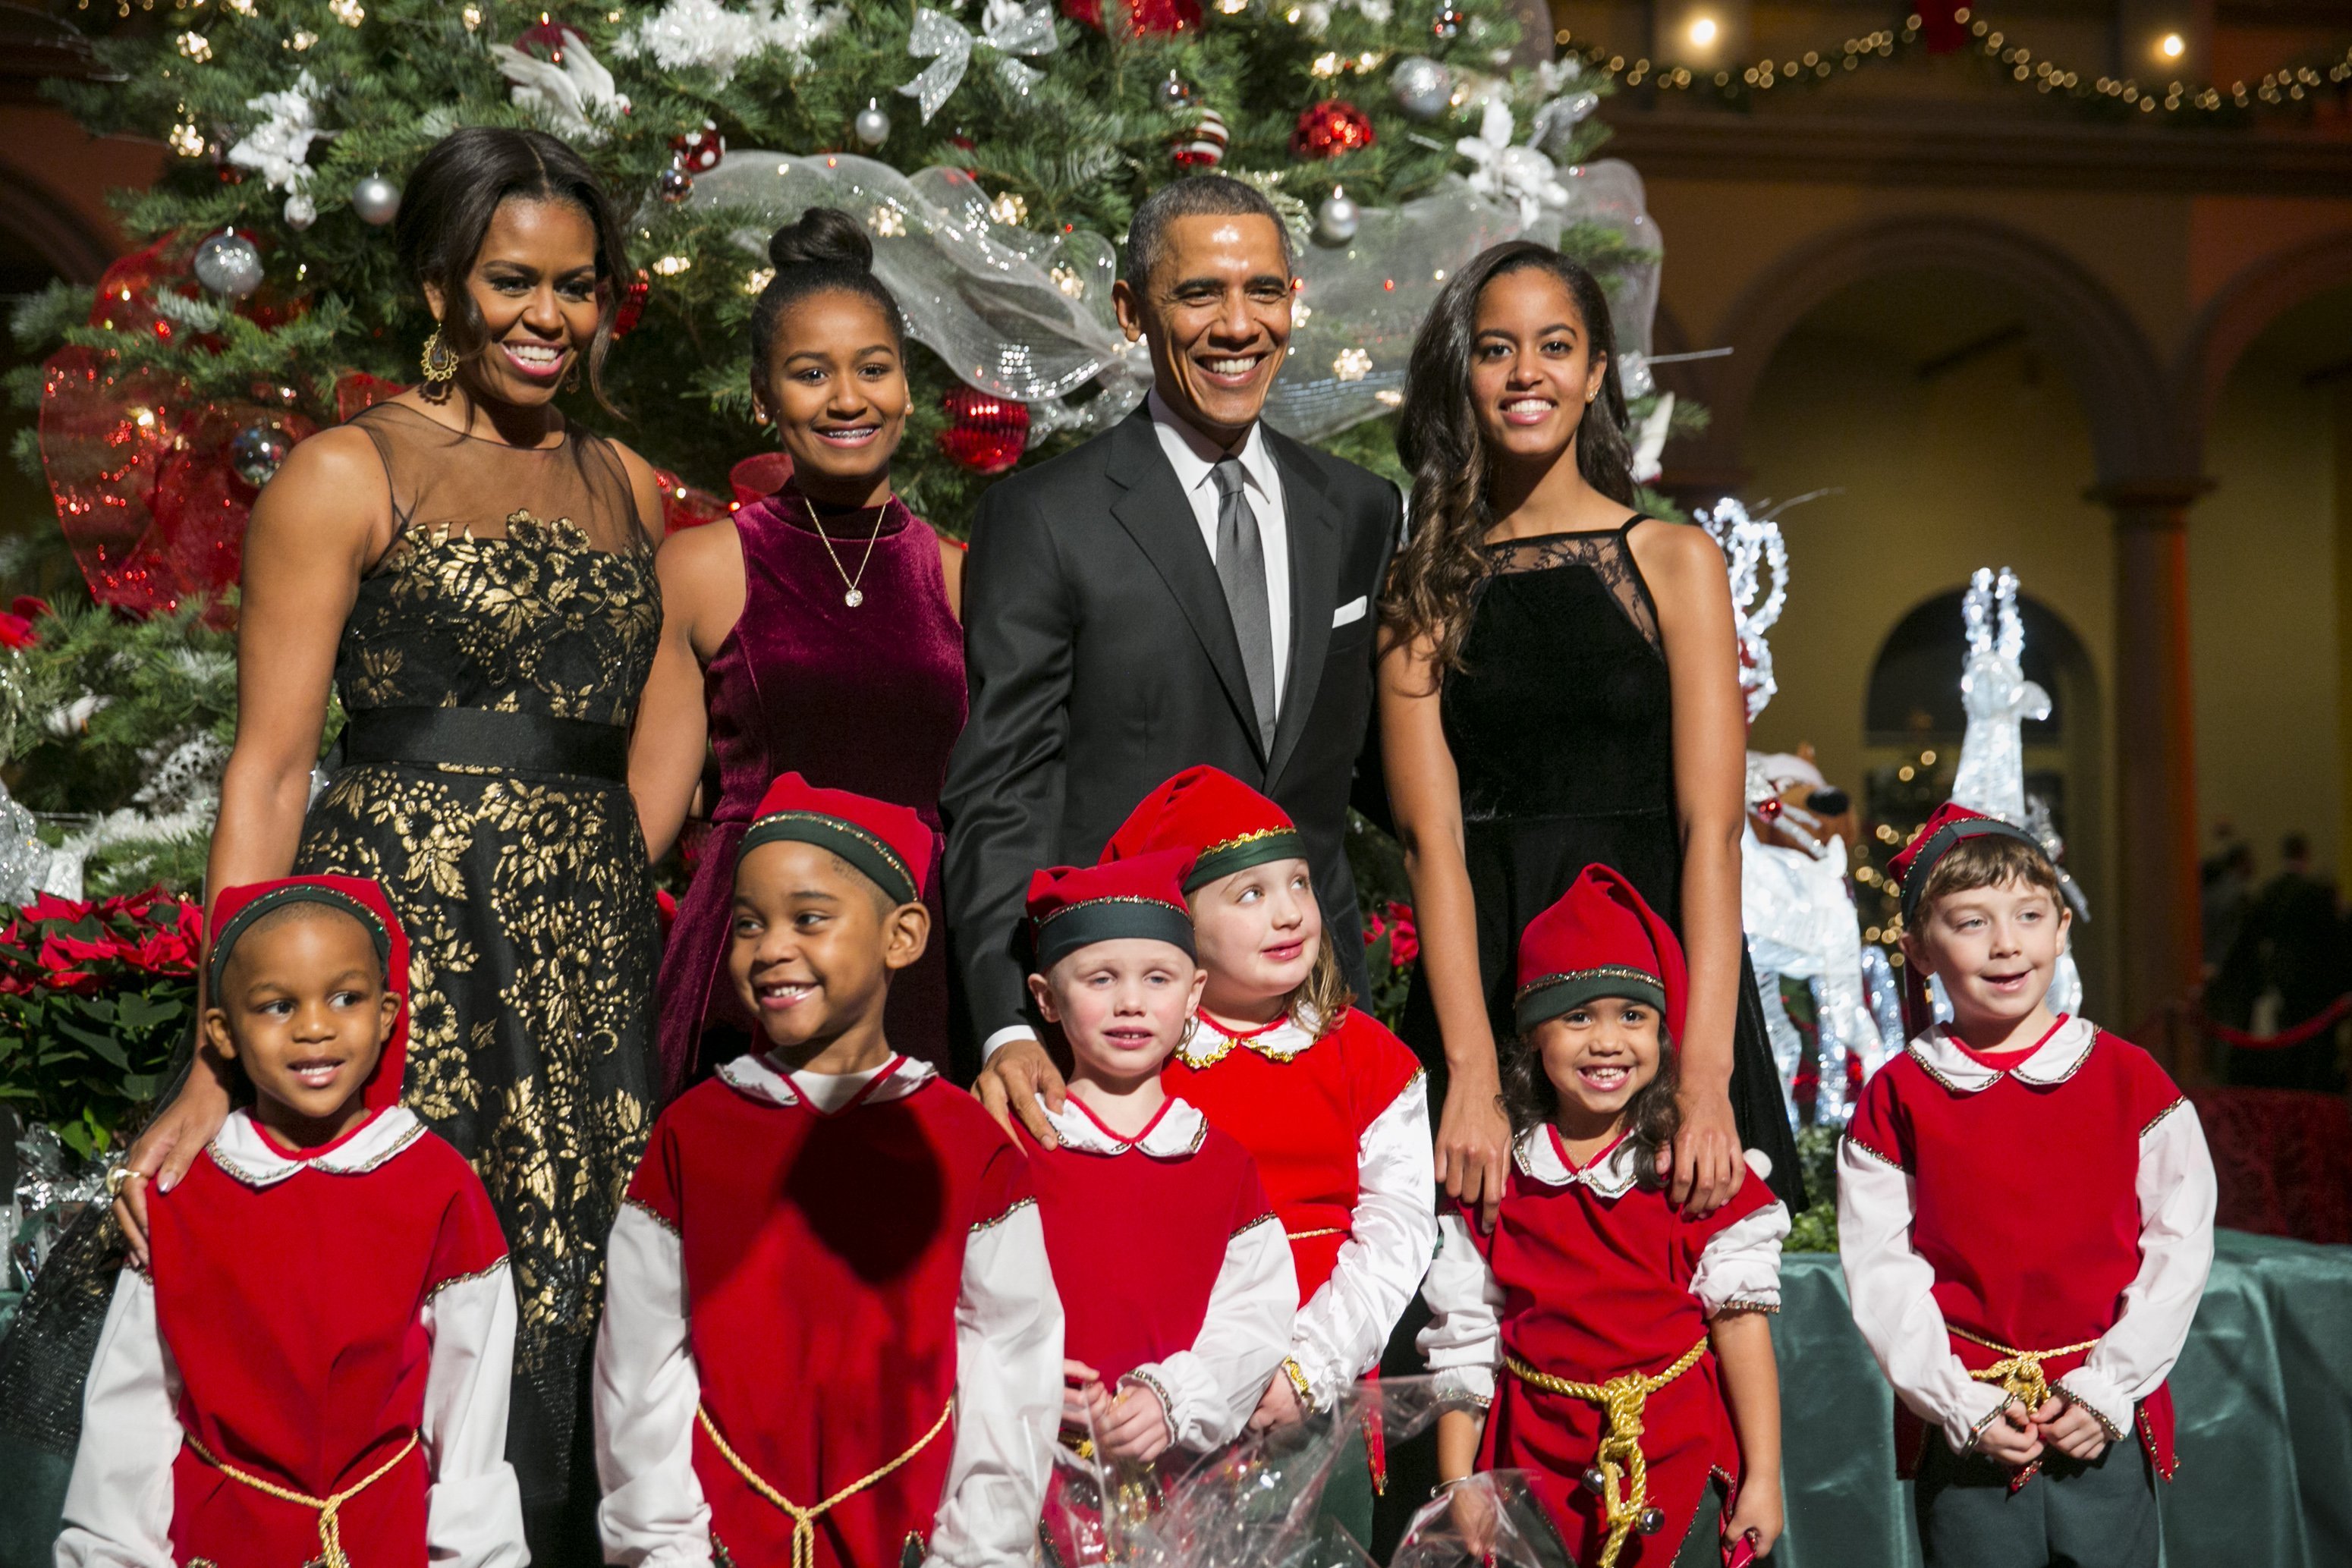 The Obamas at the 'Christmas in Washington' program on Dec. 14, 2014 in Washington, DC. | Photo: Getty Images.